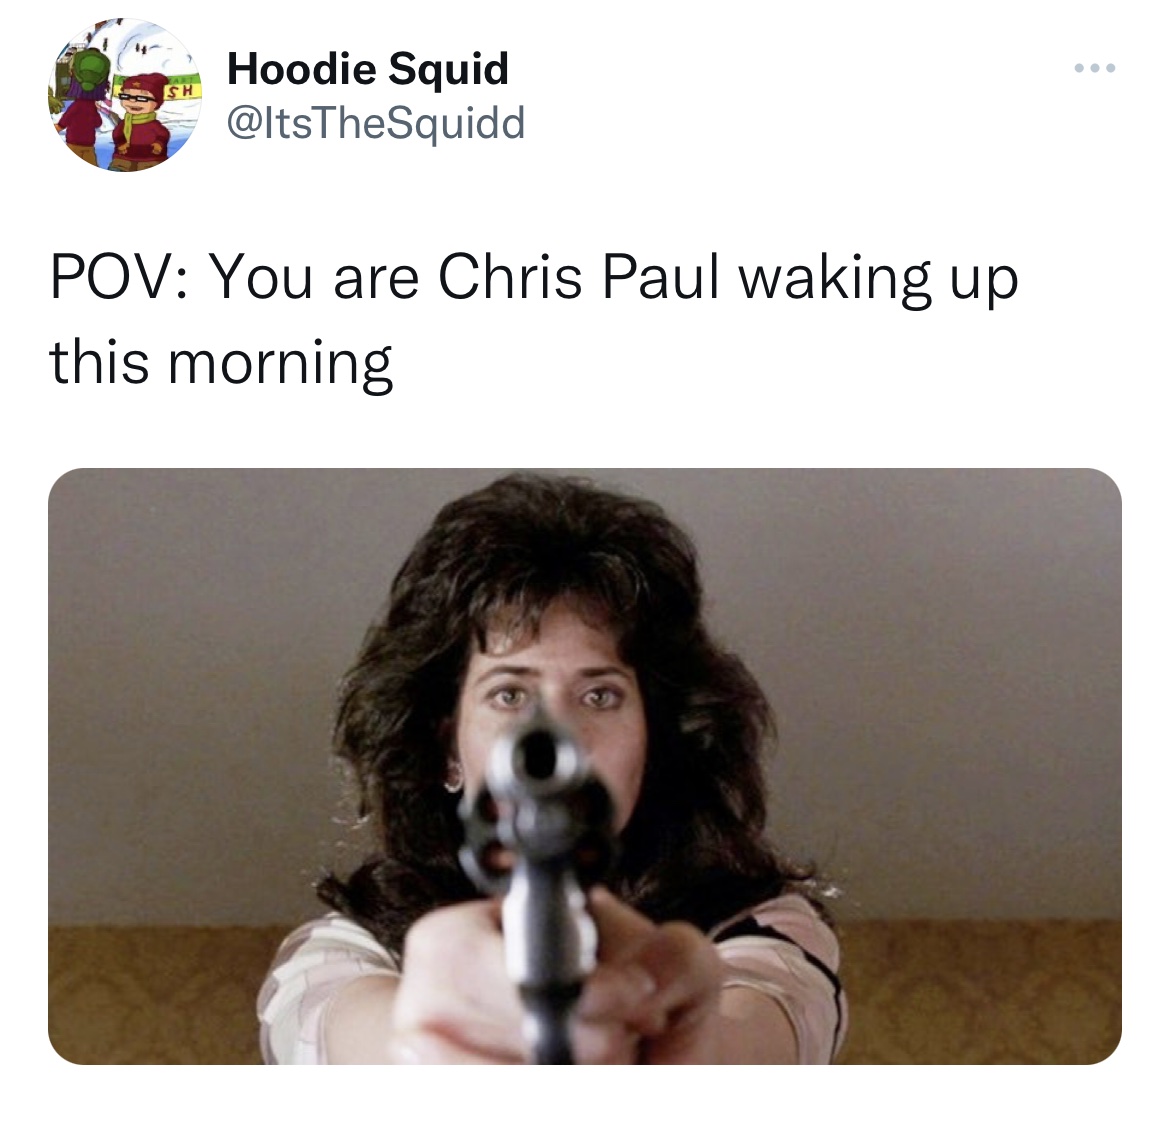 Chris Paul and Kim K memes - goodfellas wake up henry - Sh Hoodie Squid Pov You are Chris Paul waking up this morning